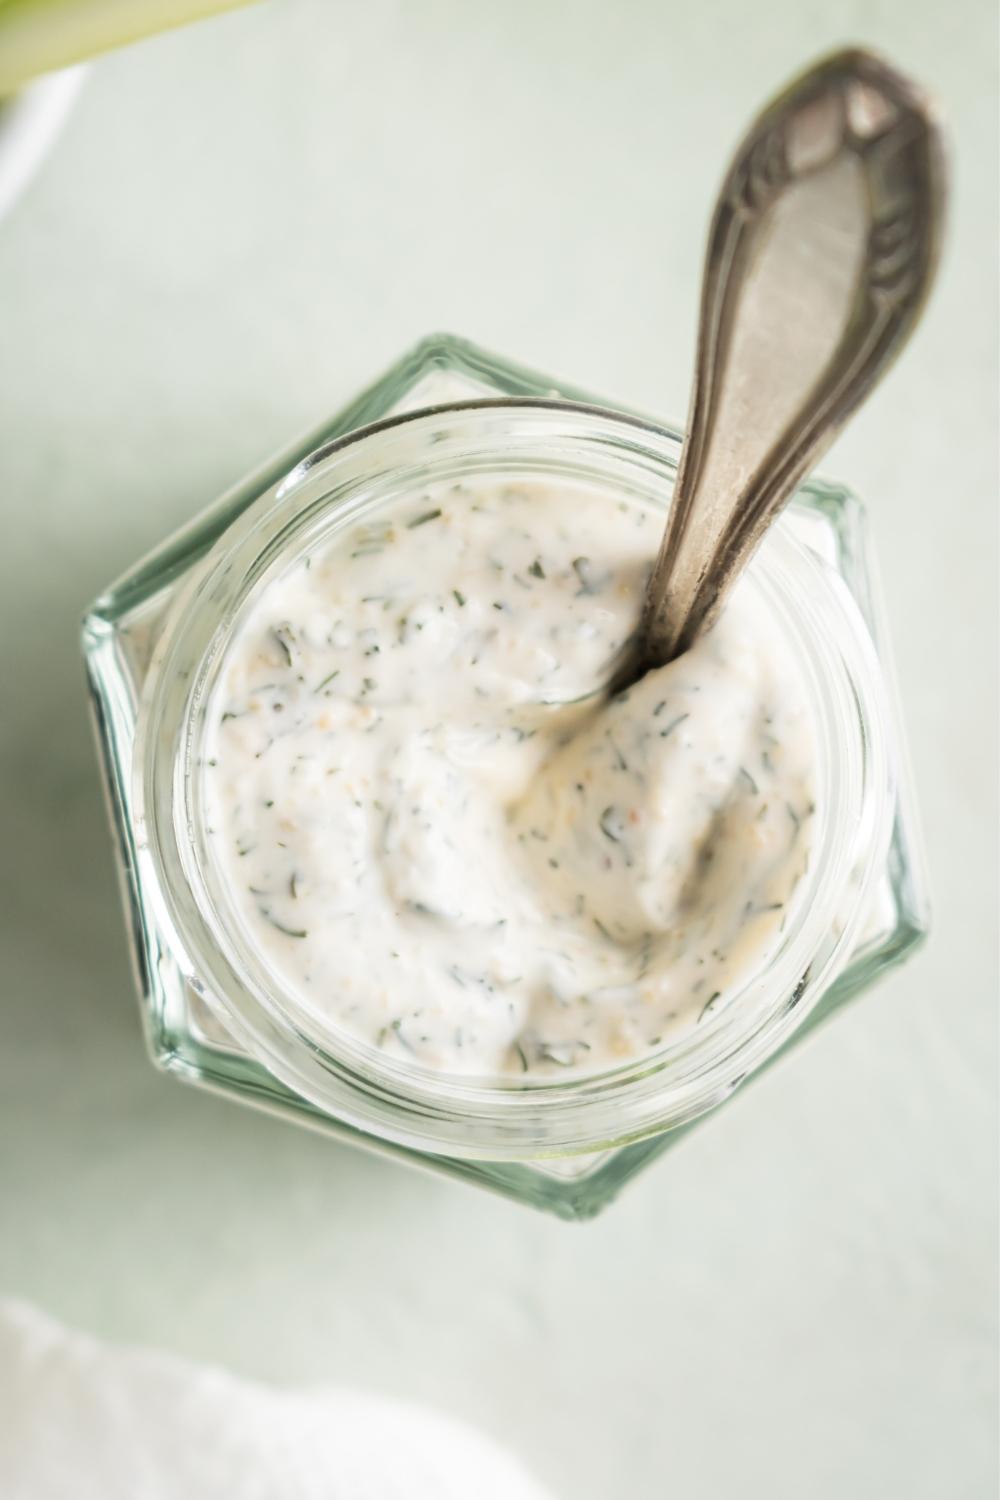 An overhead view of a mason jar containing dill dip in it with a spoon.